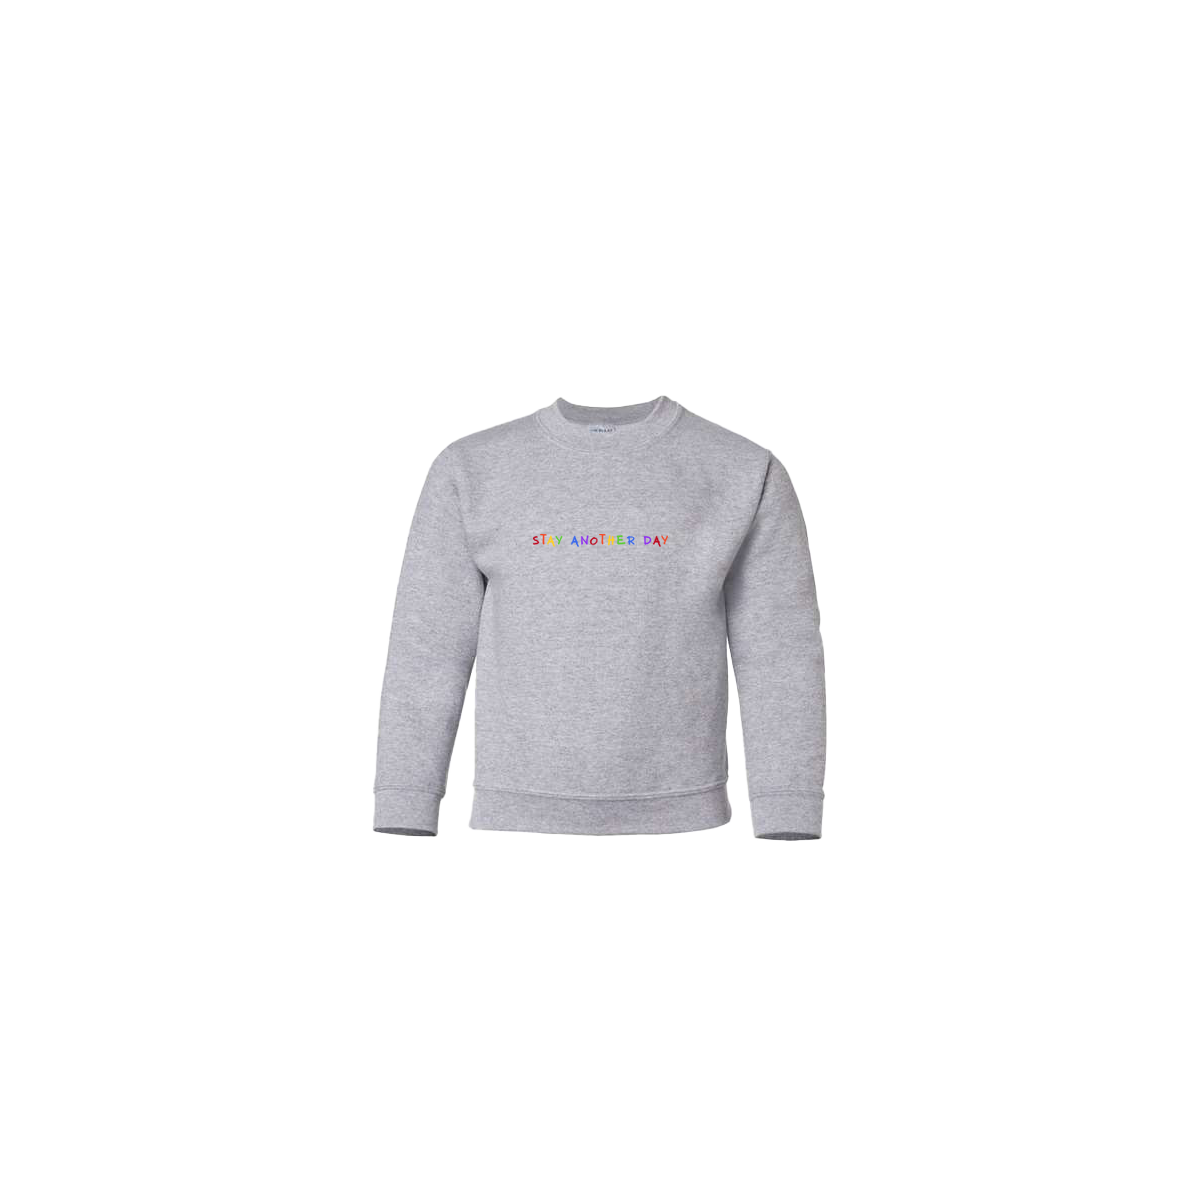 Stay Another Day Rainbow Embroidered Grey Youth Crewneck